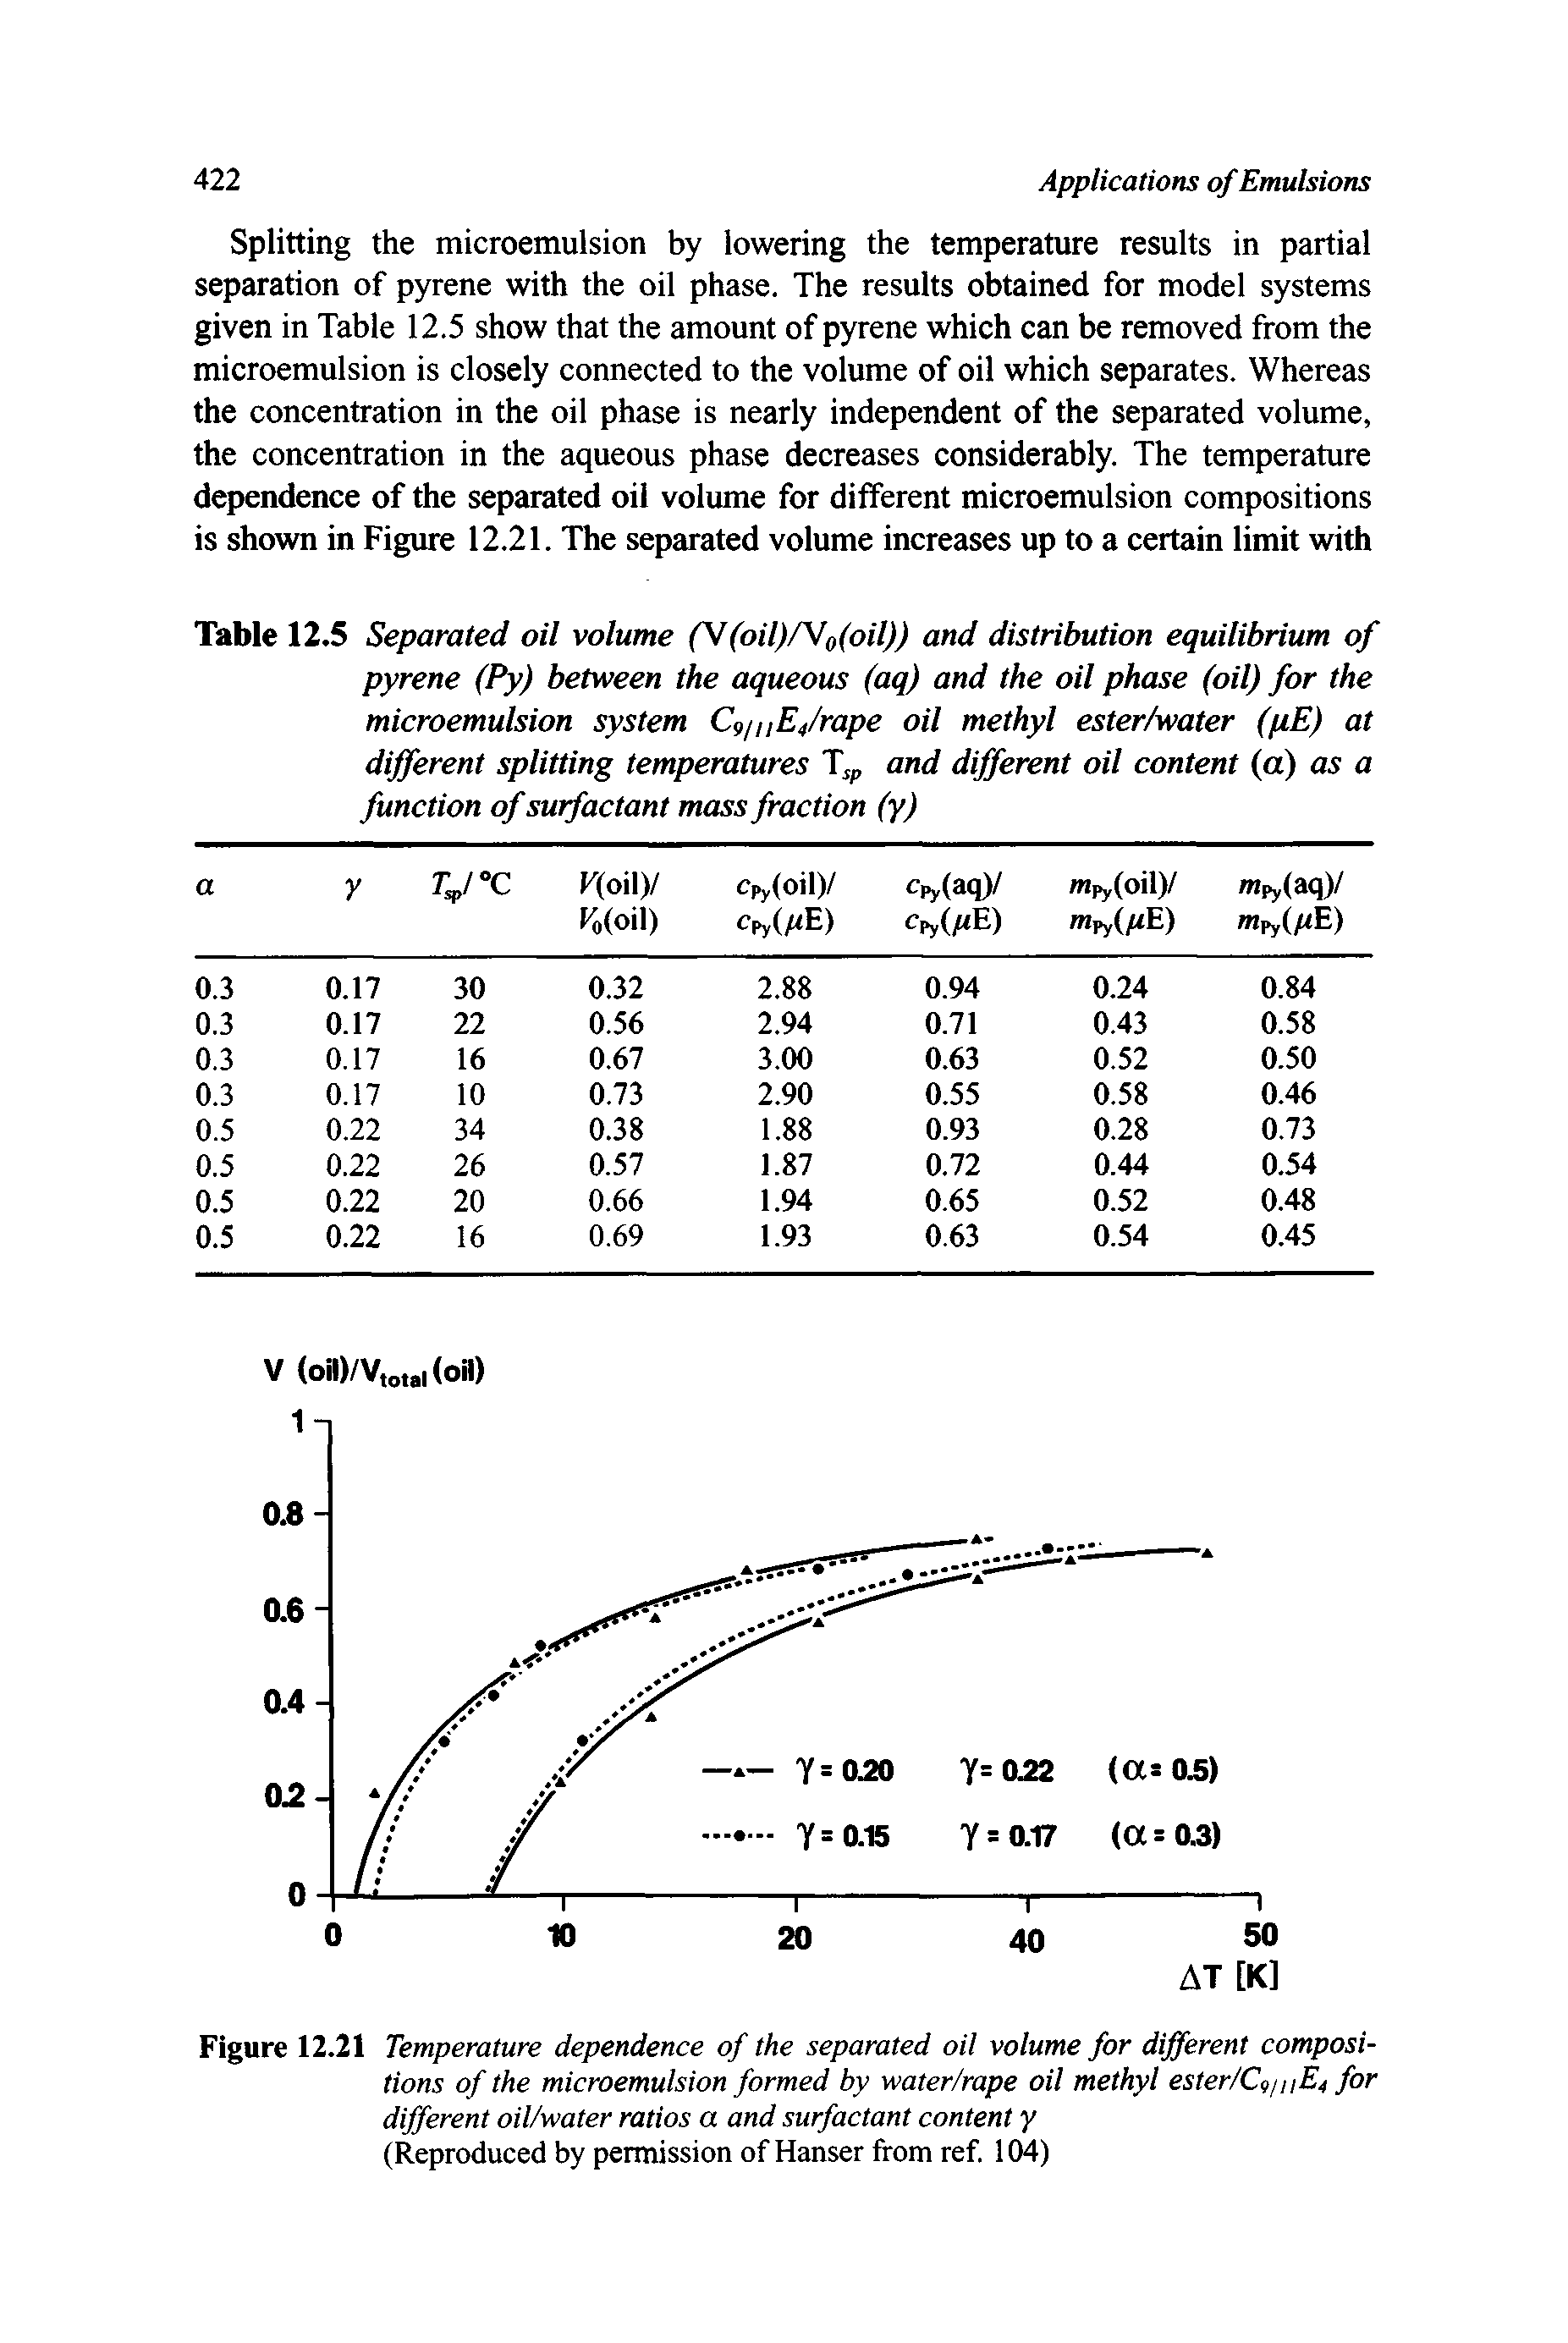 Table 12.5 Separated oil volume (W(oil)/Vo(oil)) and distribution equilibrium of pyrene (Py) between the aqueous (aq) and the oil phase (oil) for the microemulsion system Ct>/nE4/rape oil methyl ester/water (pE) at different splitting temperatures T p and different oil content (a) as a function of surfactant mass fraction (y)...